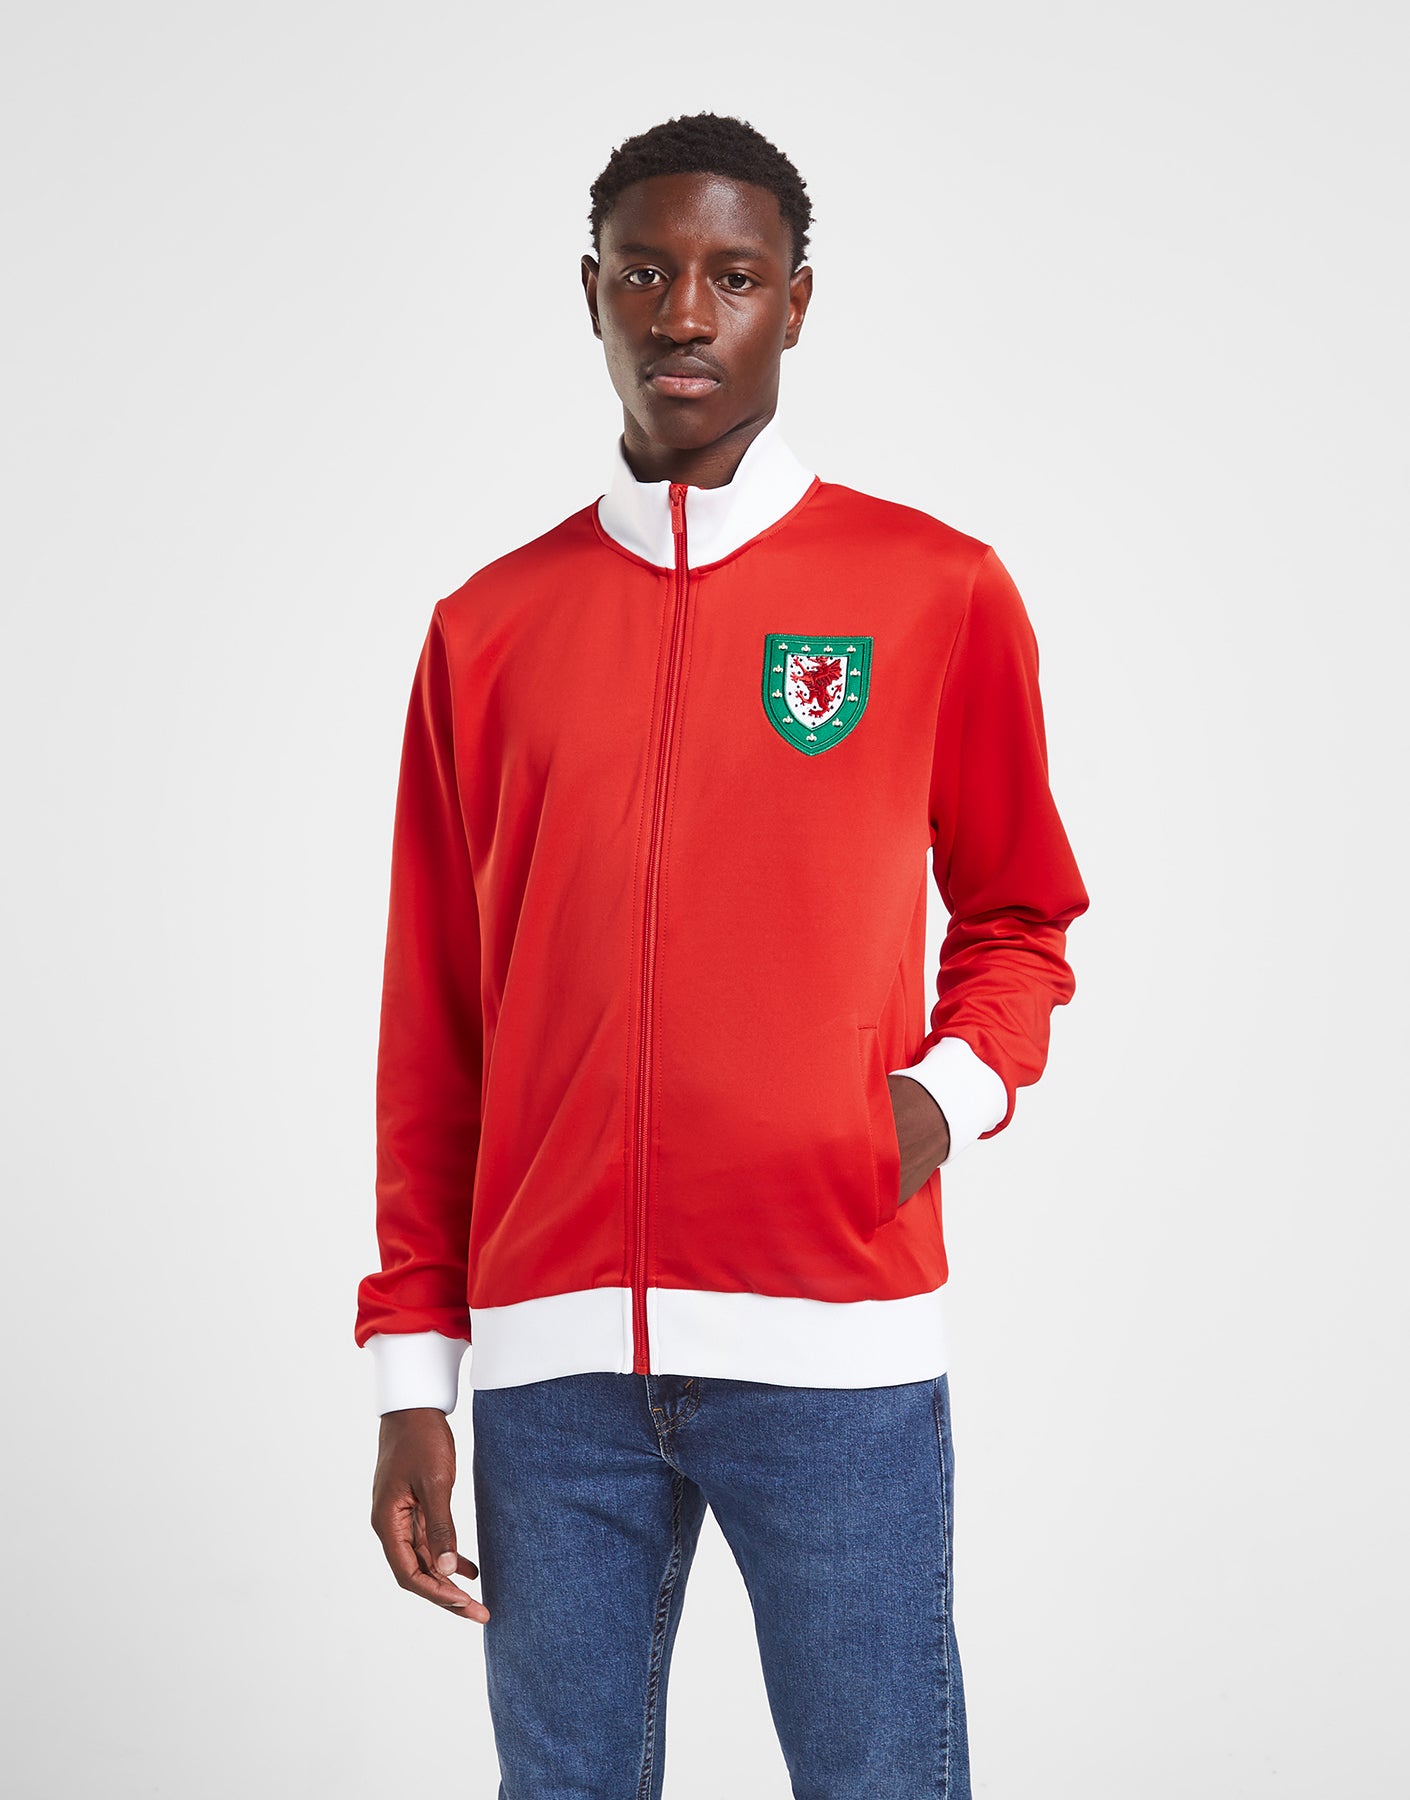 Official Team Wales Retro Track Top - Red